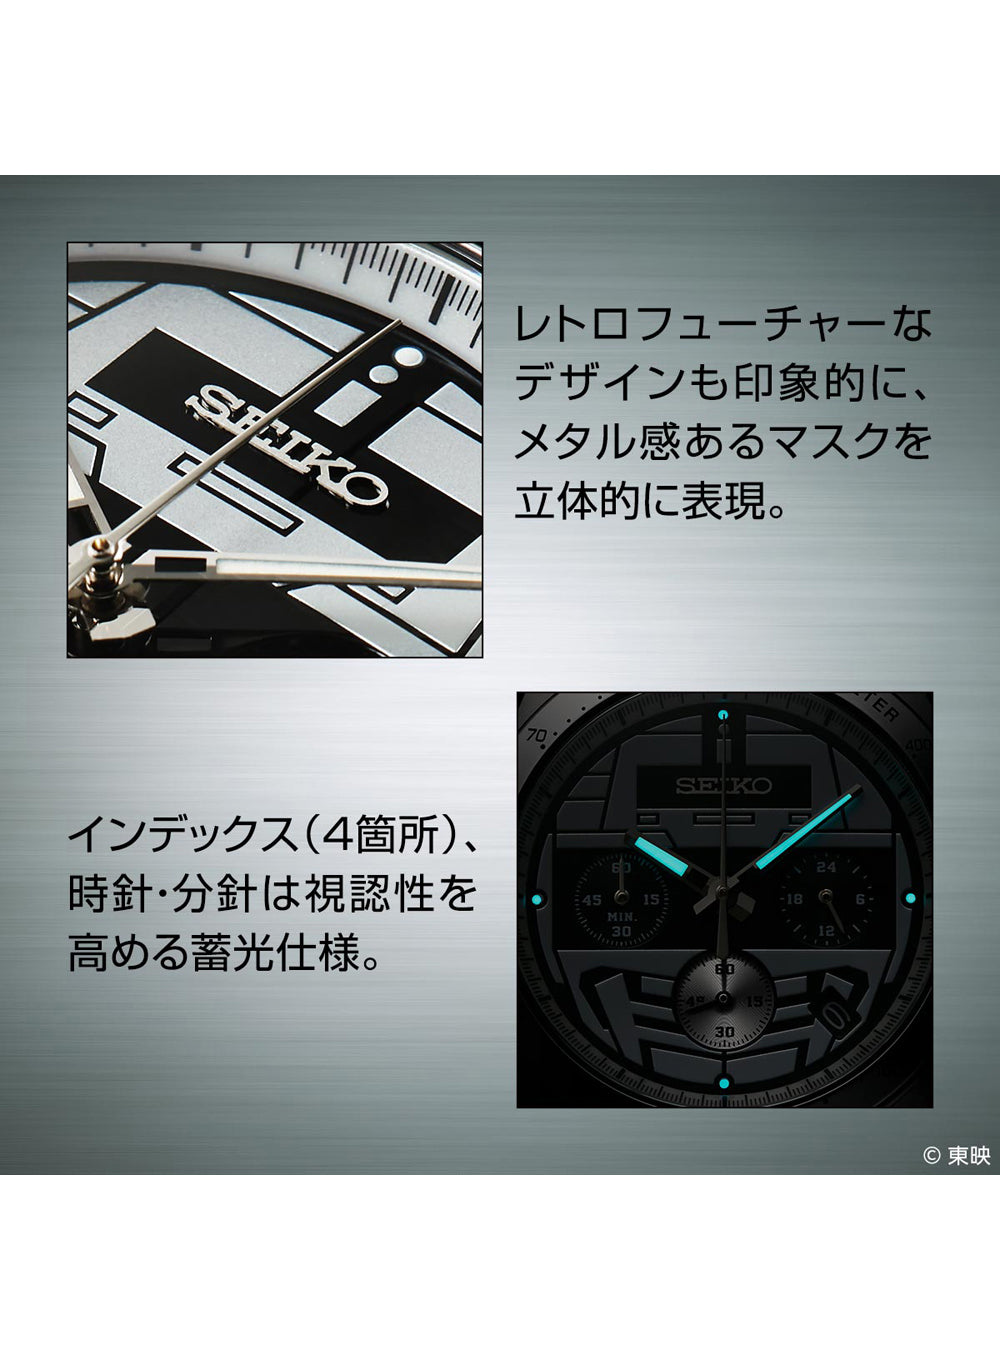 SEIKO × SPACE SHERIFF GAVAN 40TH ANNIVERSARY LIMITED EDITION MADE IN JAPAN